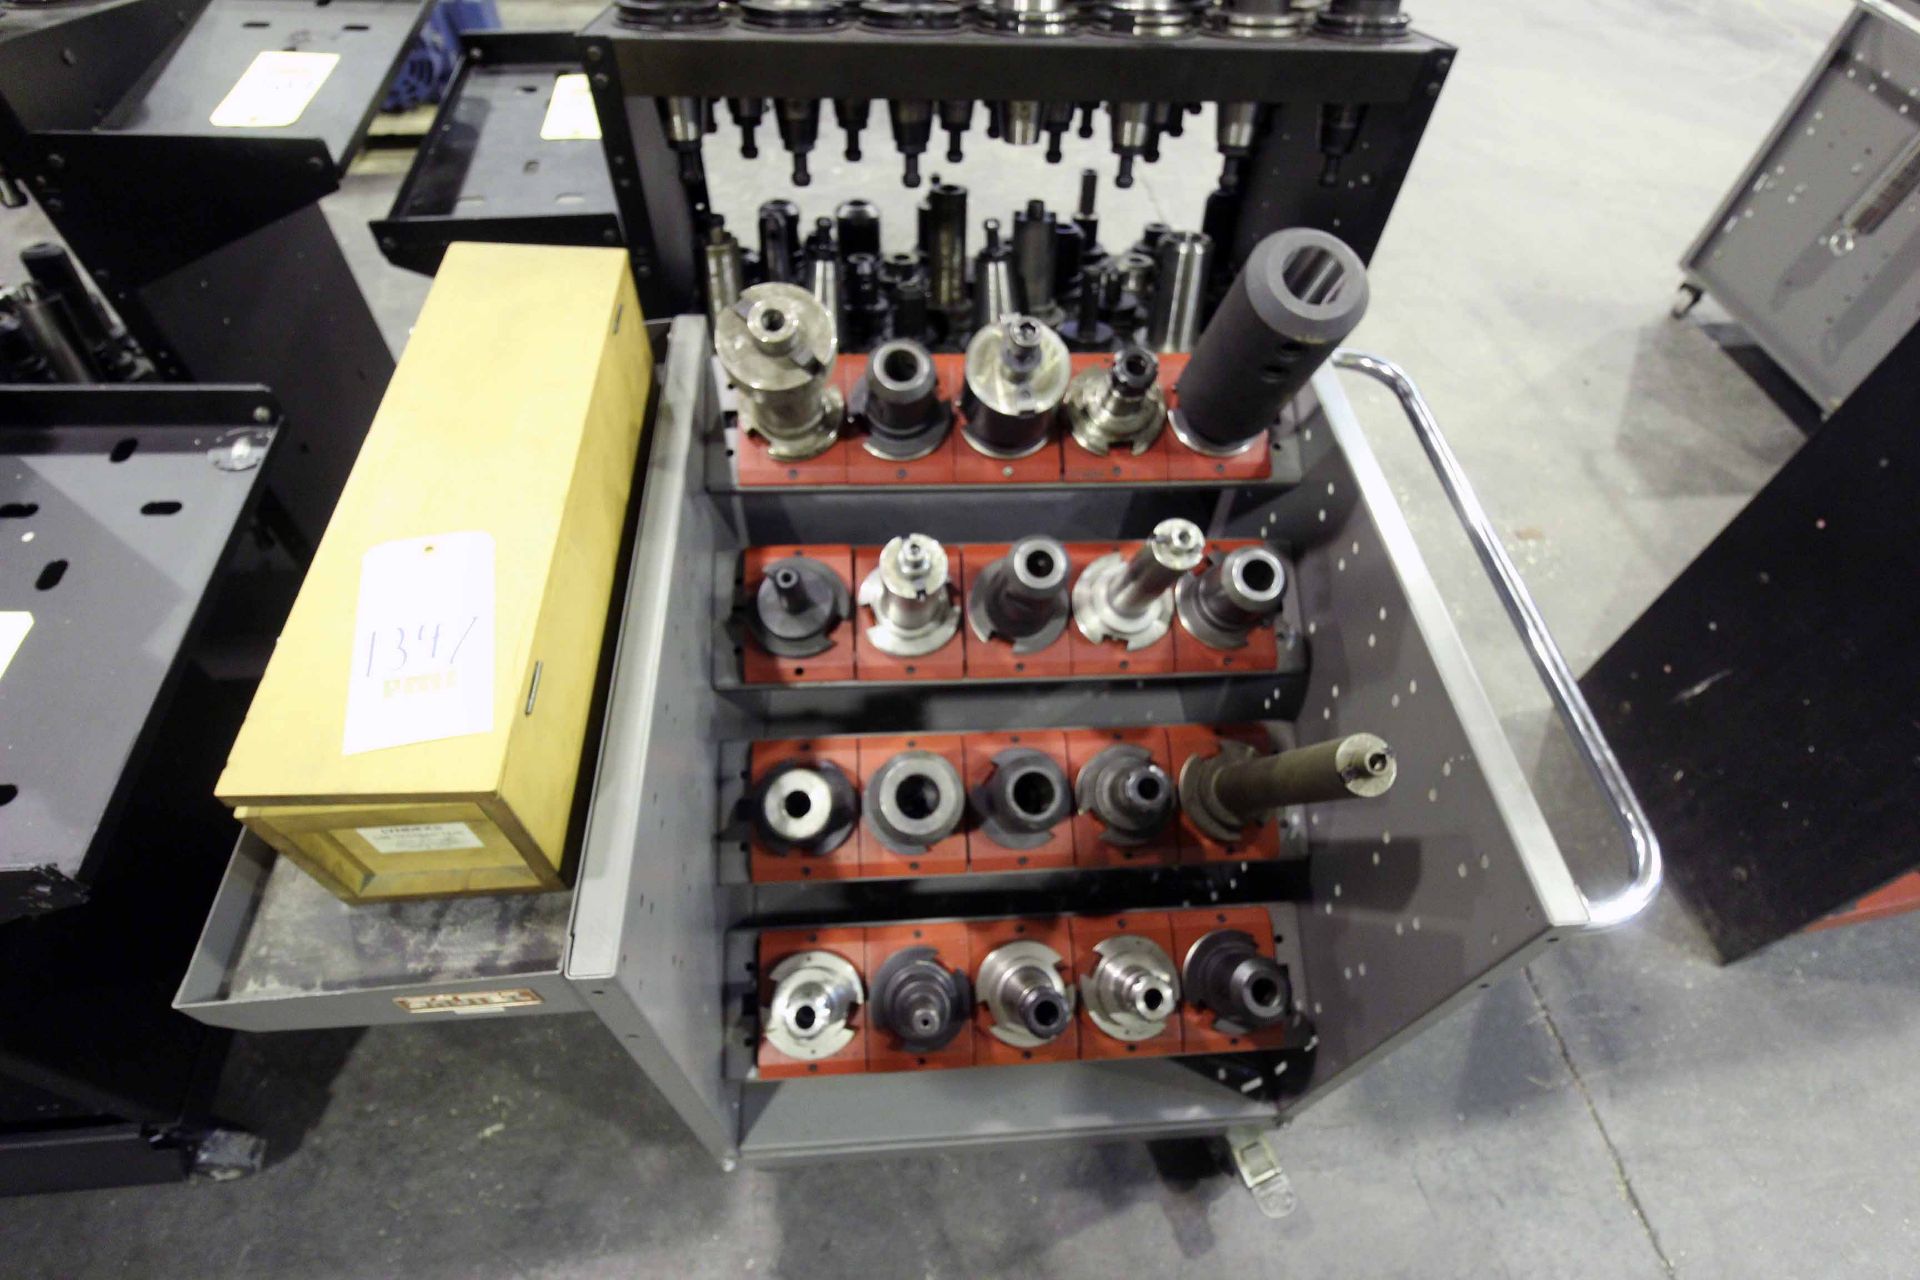 LOT CONSISTING OF: (20) assorted CAT-50 toolholders (on shutter roller cart) & Lyndex C-50 14.0 test